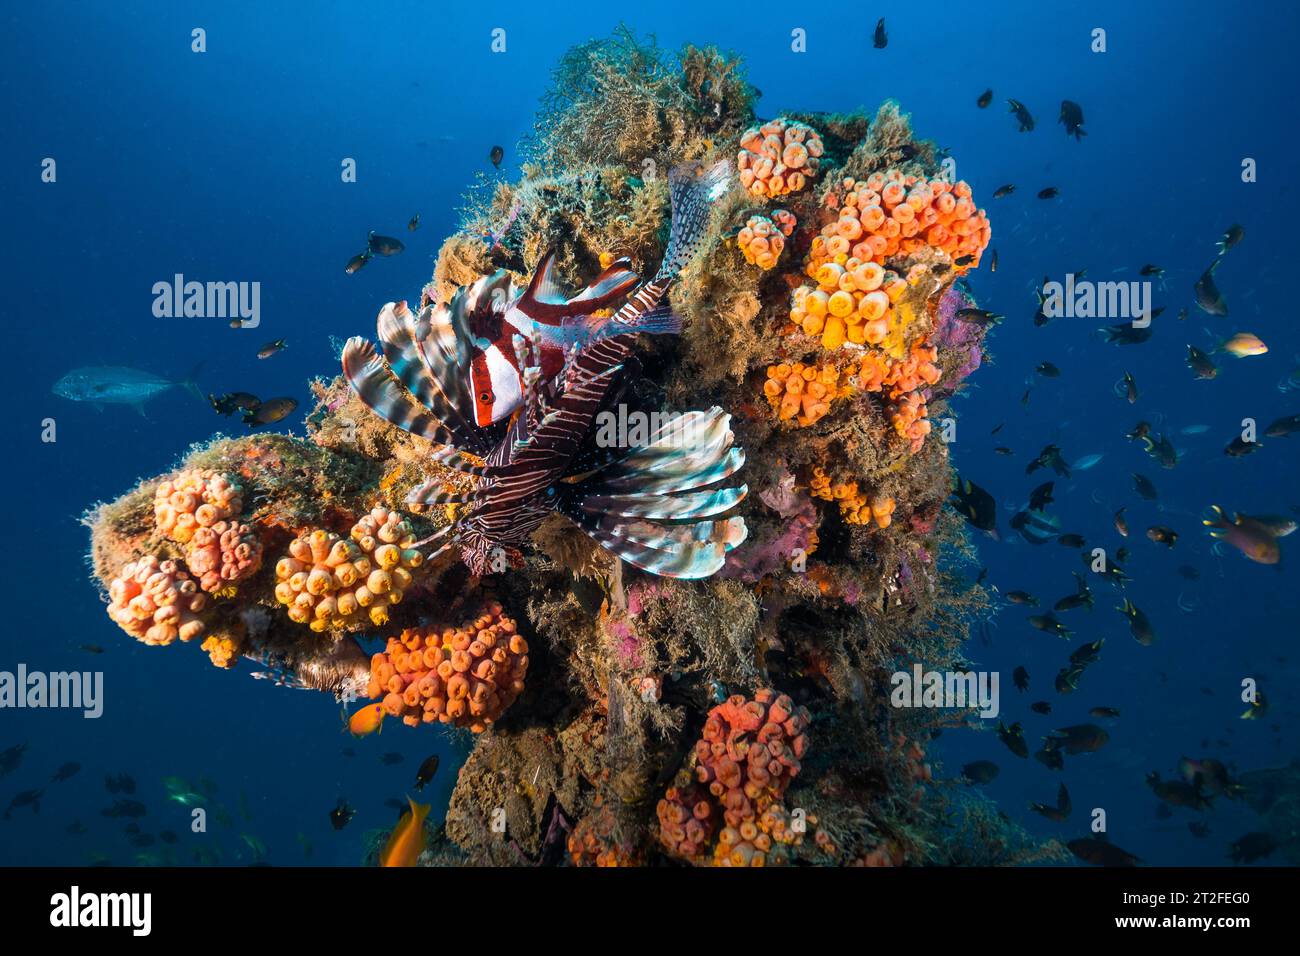 A lion fish with a Red Emperor Snapper fish (Lutjanus sebae) hiding in its spiny fins sitting on a protrusion of an old ship wreck covered with corals Stock Photo